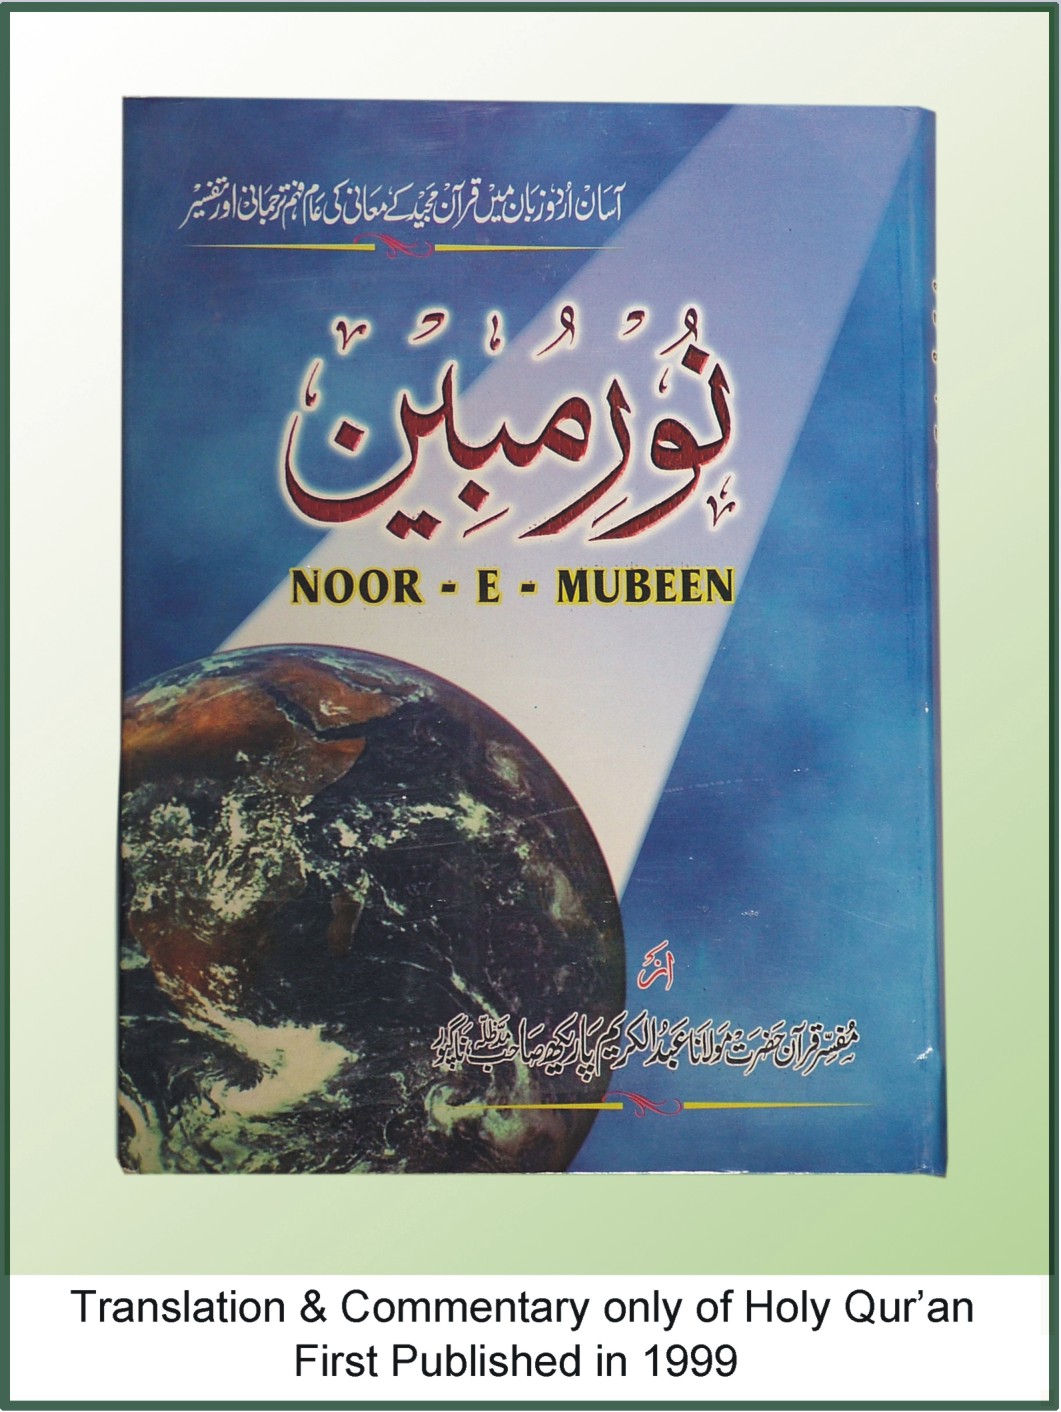 Translation & Commentary only of The Holy Qur'an (Urdu) First Published in 1999